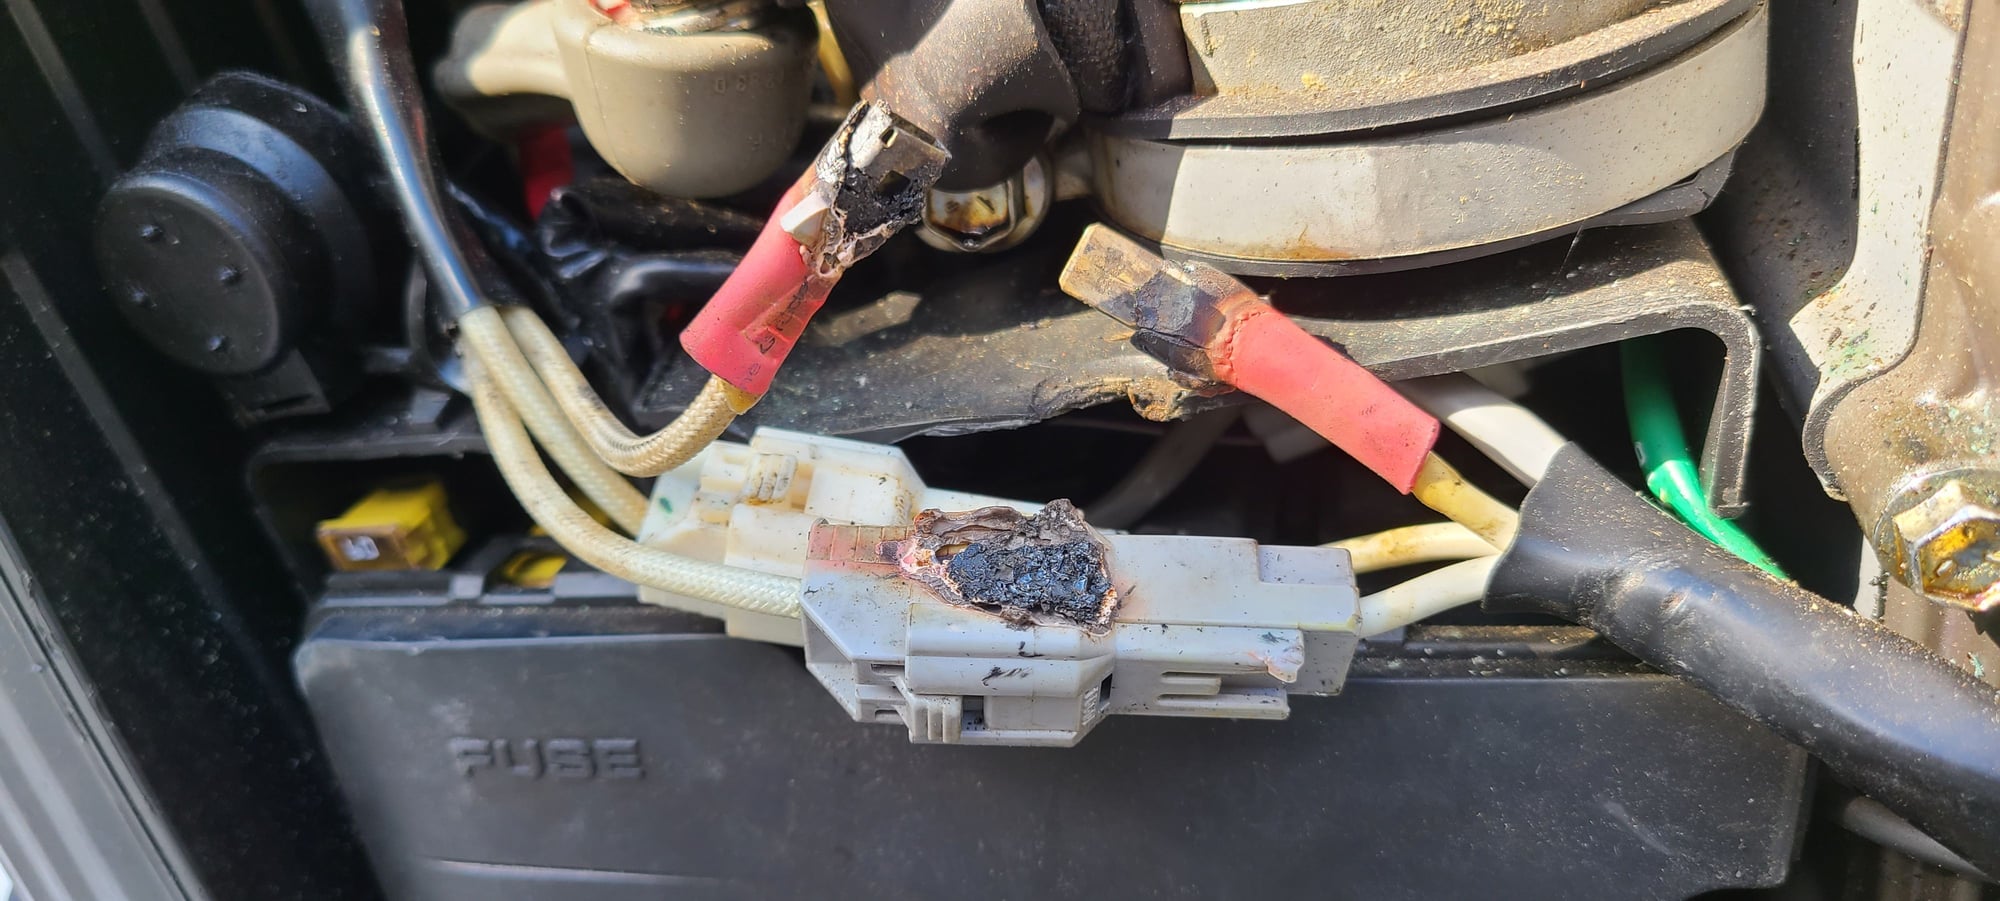 2005 DF140 Electrical Connection Melted - The Hull Truth - Boating and Fishing  Forum